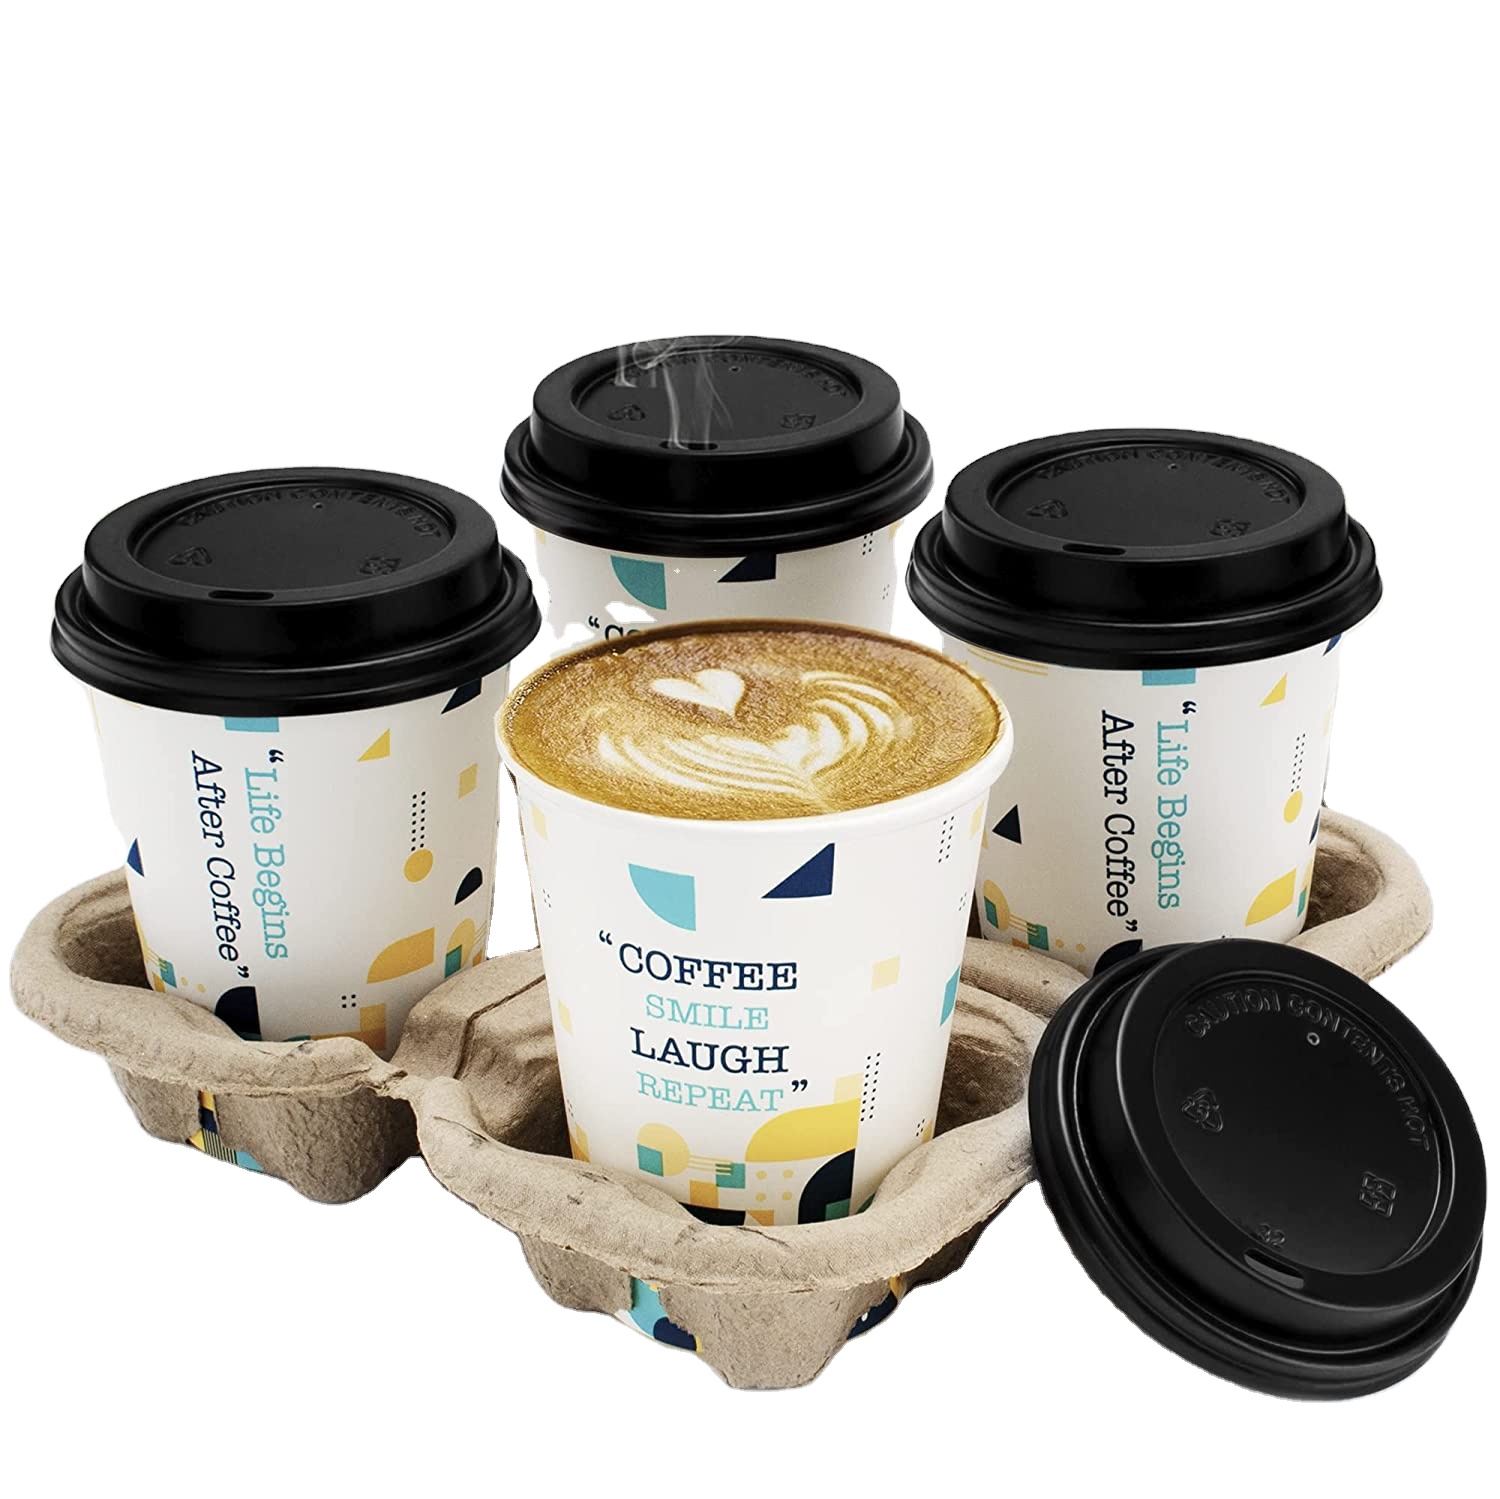 Uchampak- Disposable Coffee Cups 12 oz, Paper Cups for Hot Beverage Drinks To Go Tea Coffee Home Office Paper Cup